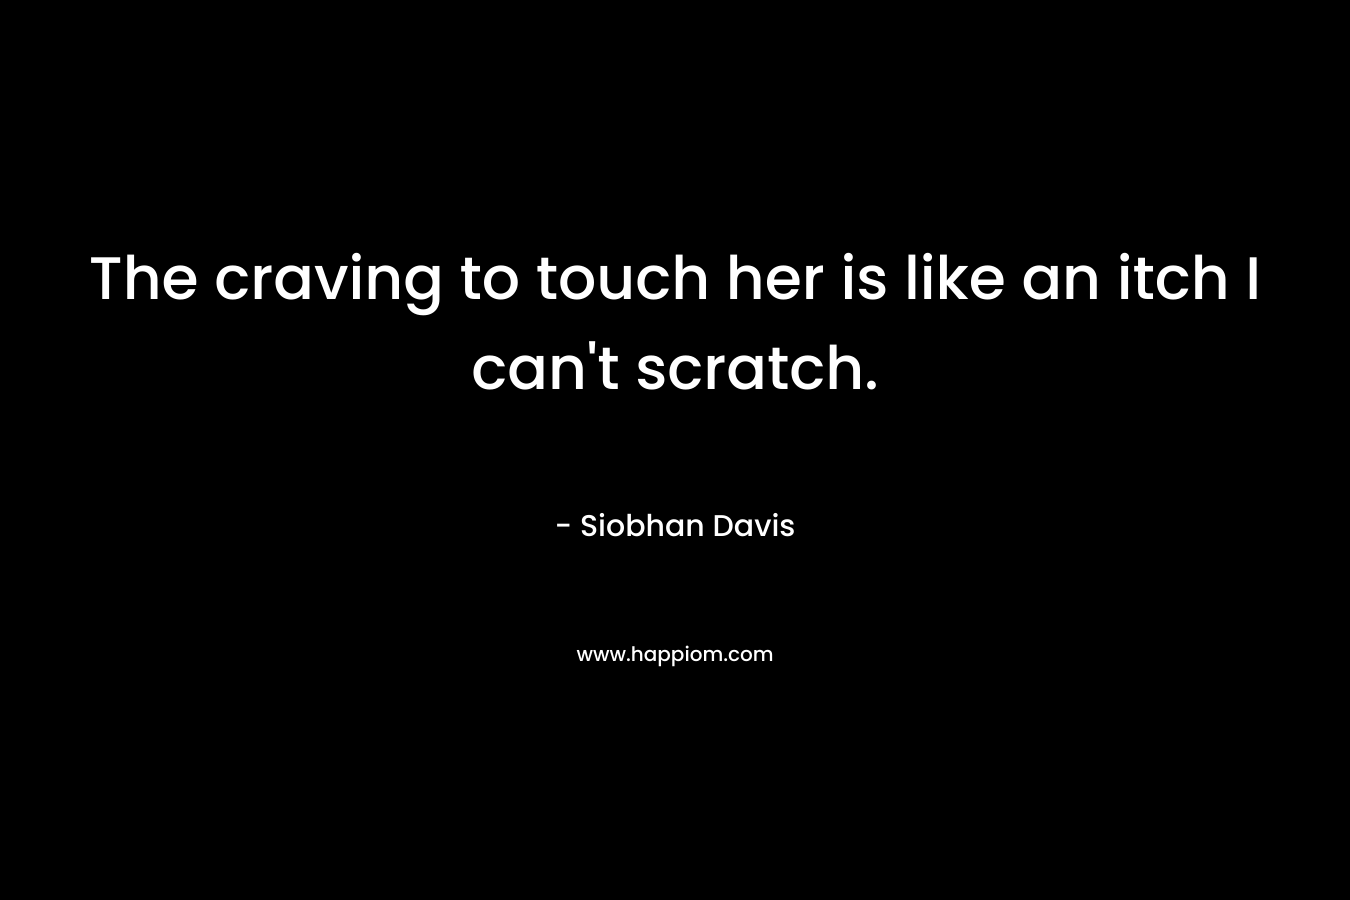 The craving to touch her is like an itch I can’t scratch. – Siobhan Davis